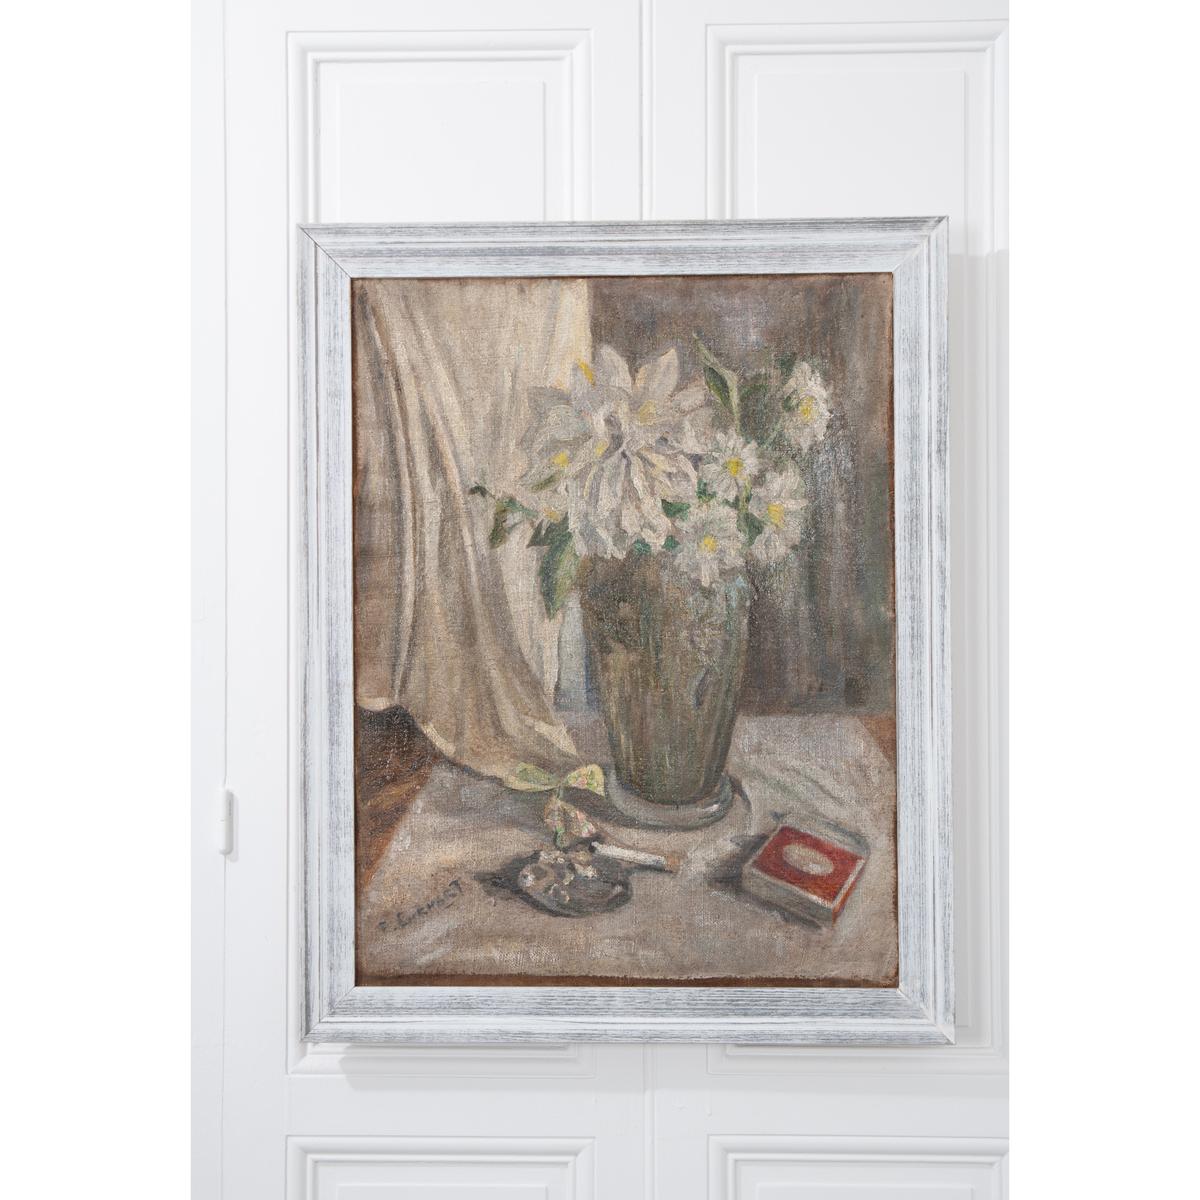 A softer palette, antique oil painting from 19th century, France. The work exhibits a vase holding dahlias and daisies, a cigarette and matches. The piece is set in a white and gray frame that works nicely with the painting. The artist has marked